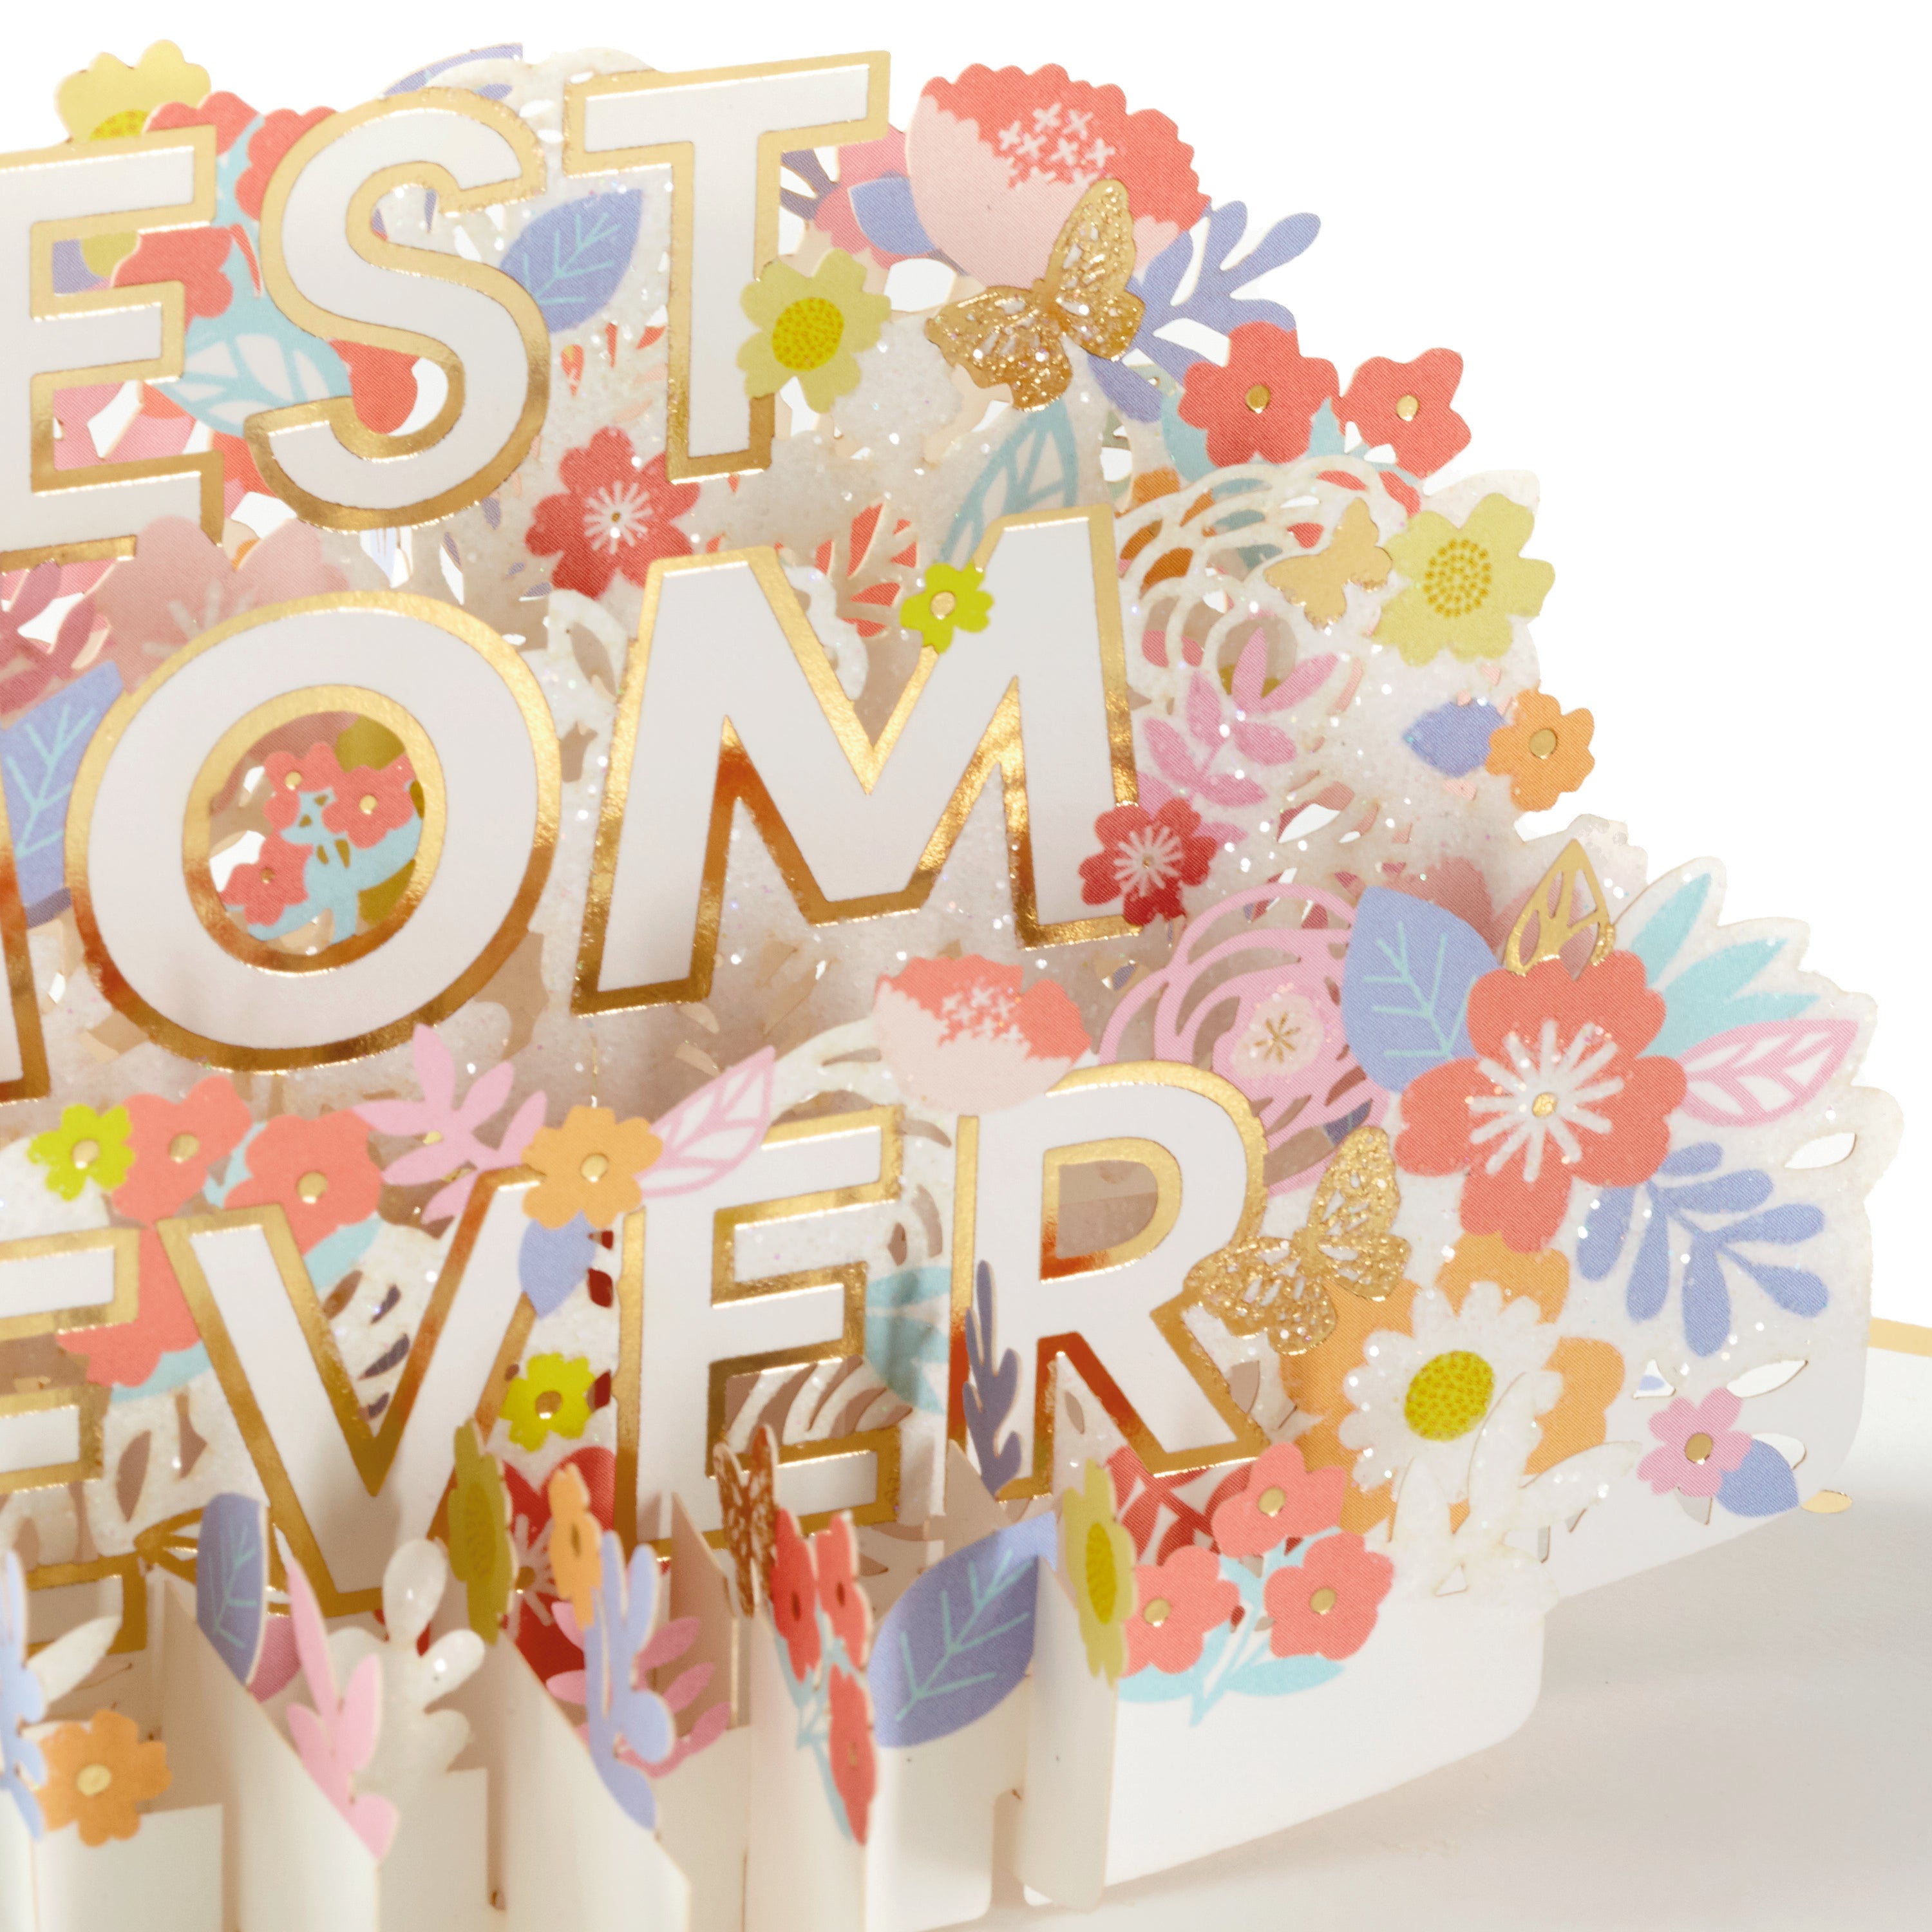 Signature Paper Wonder Pop Up Mothers Day Card (Best Mom Ever)